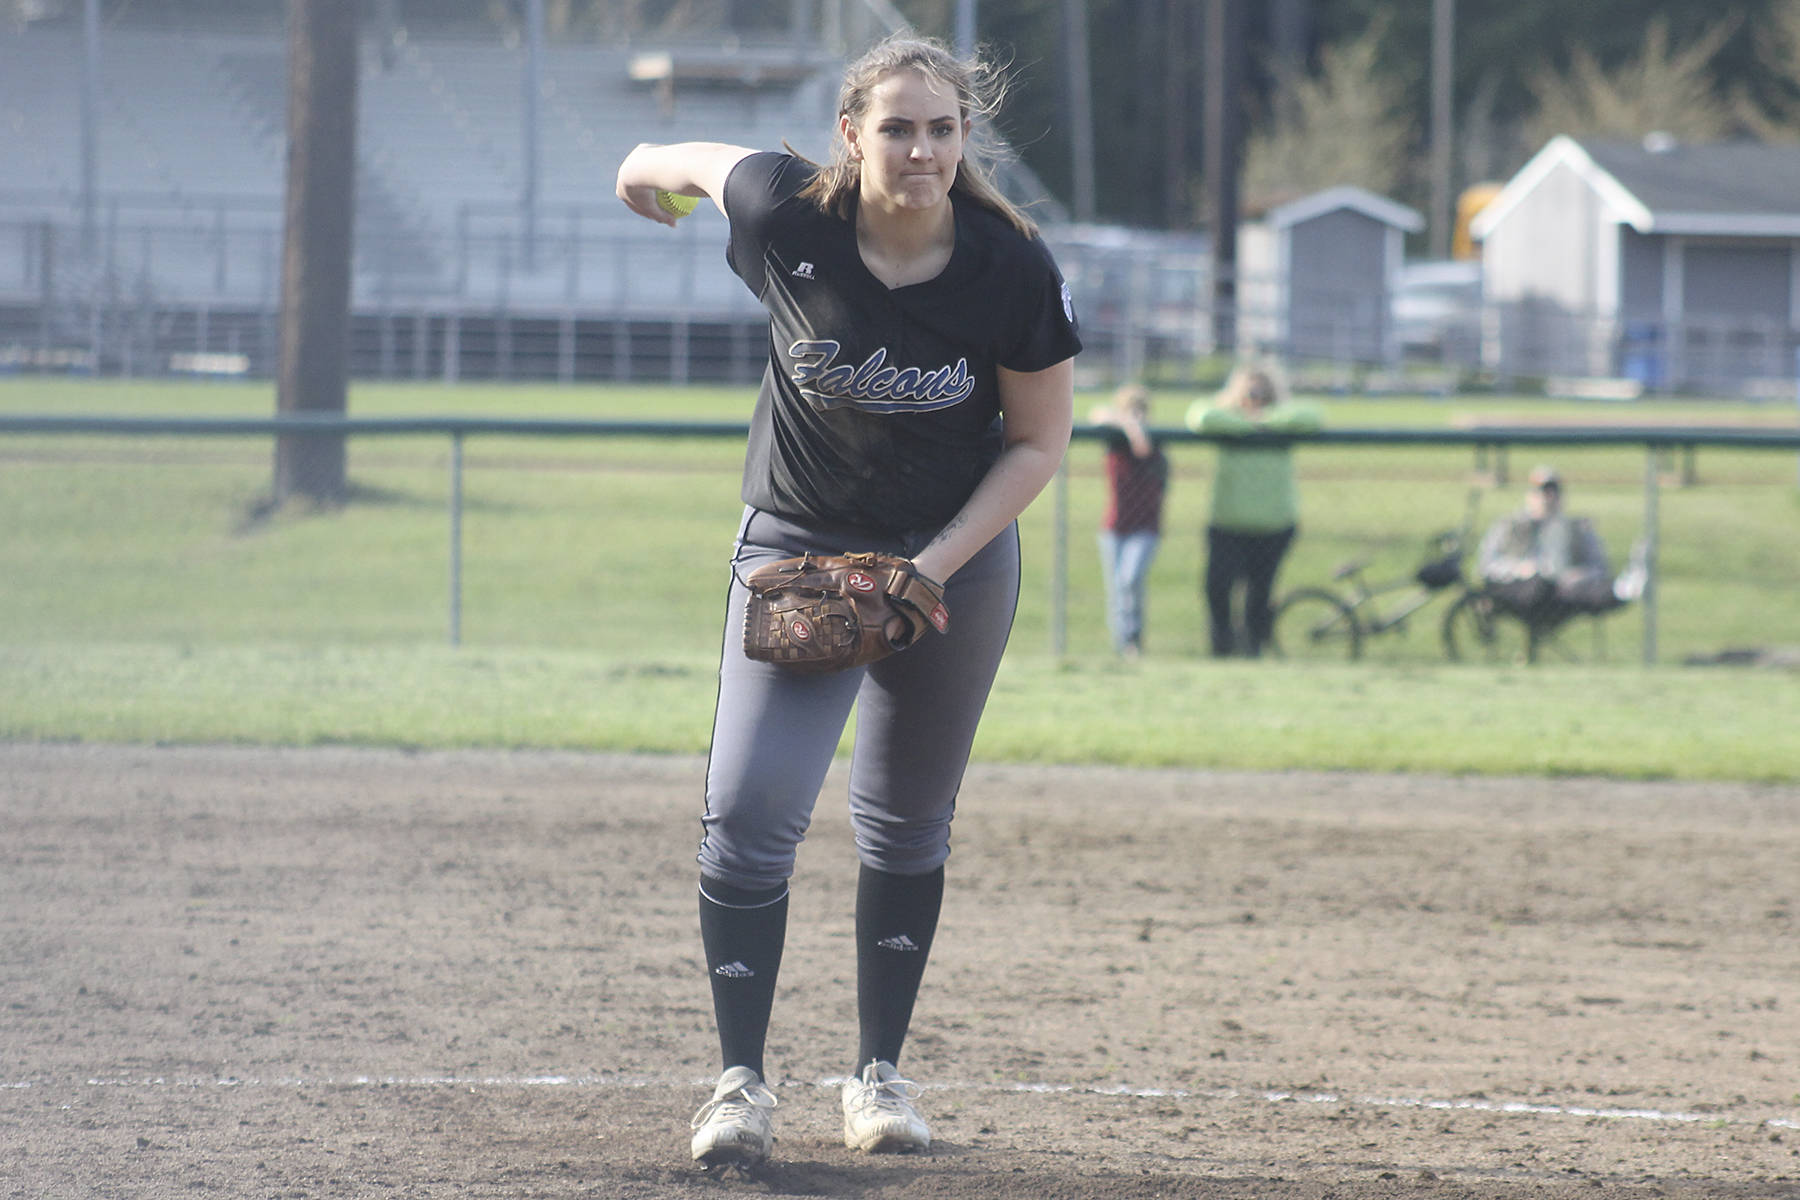 Falcon softball standout to compete in national tournaments with select team